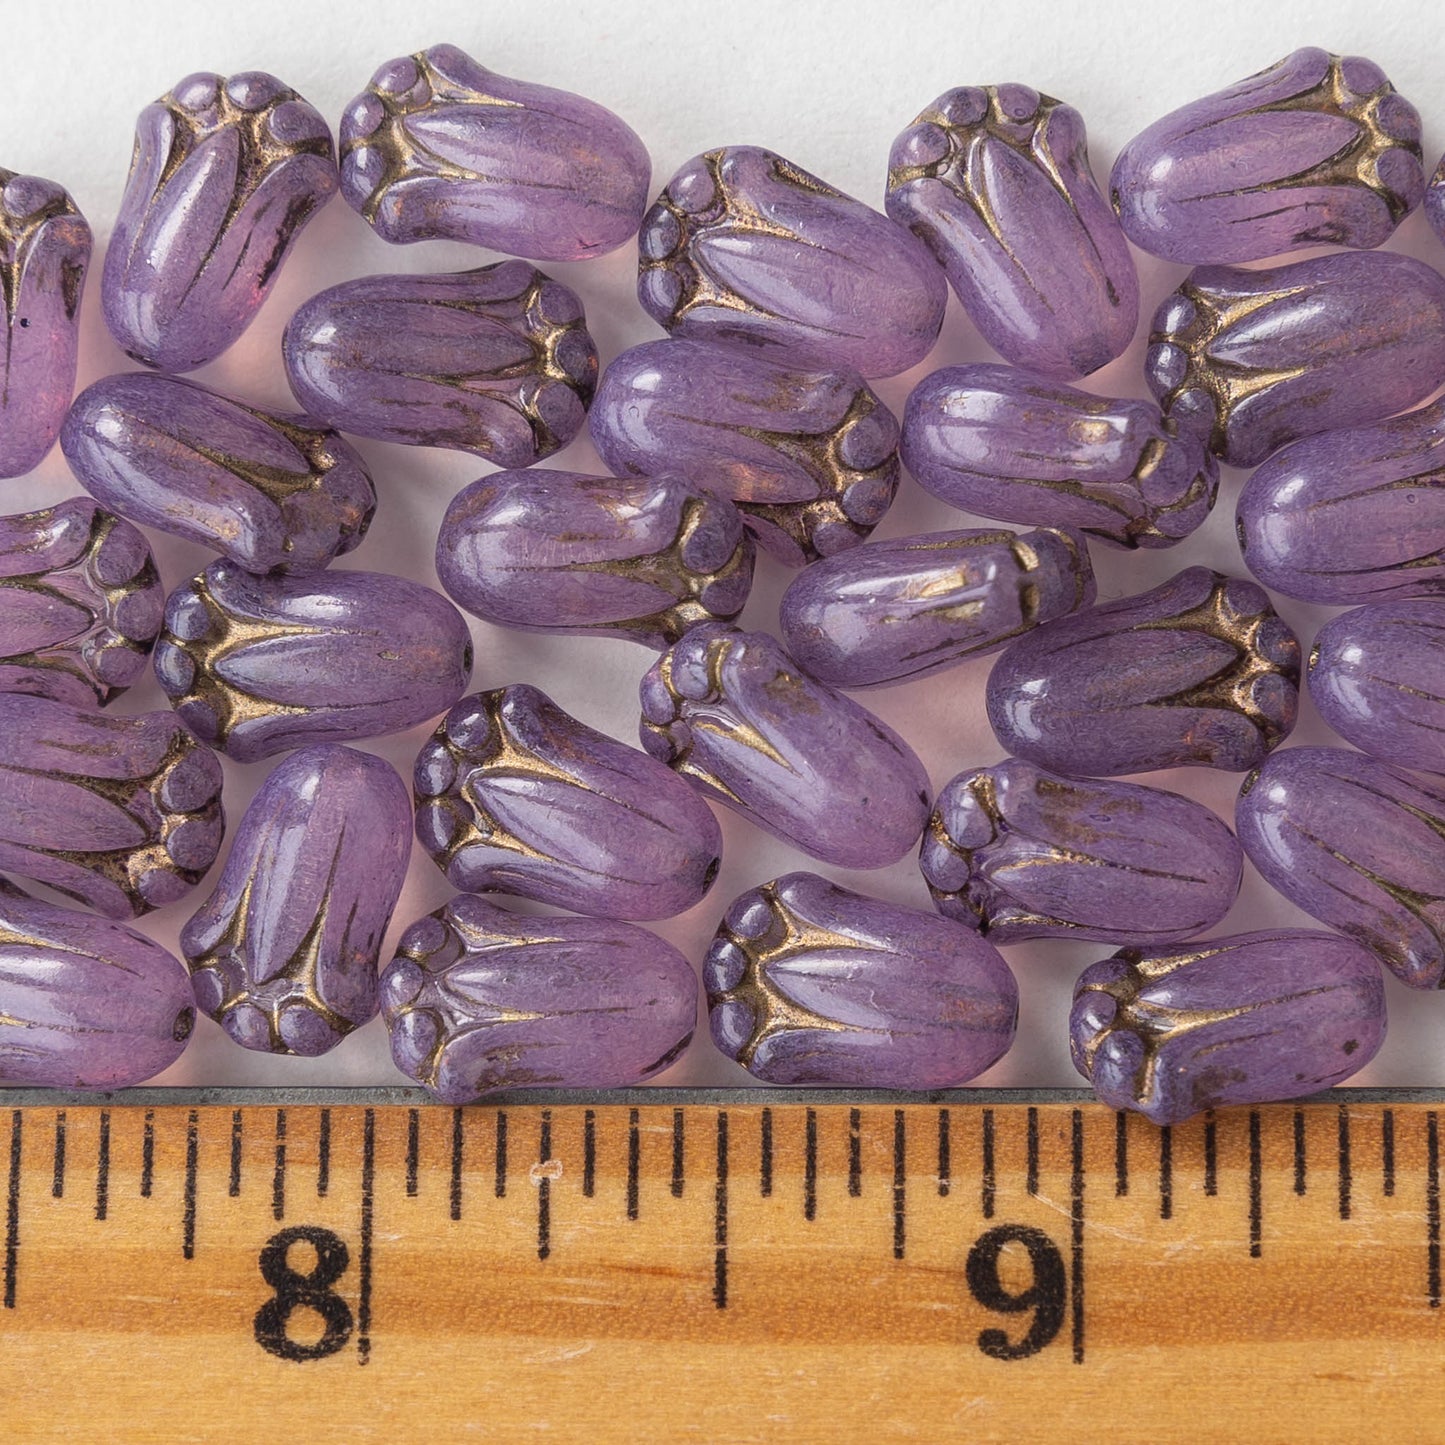 12mm Tulip Flower - Purple with Gold Wash - 20 beads